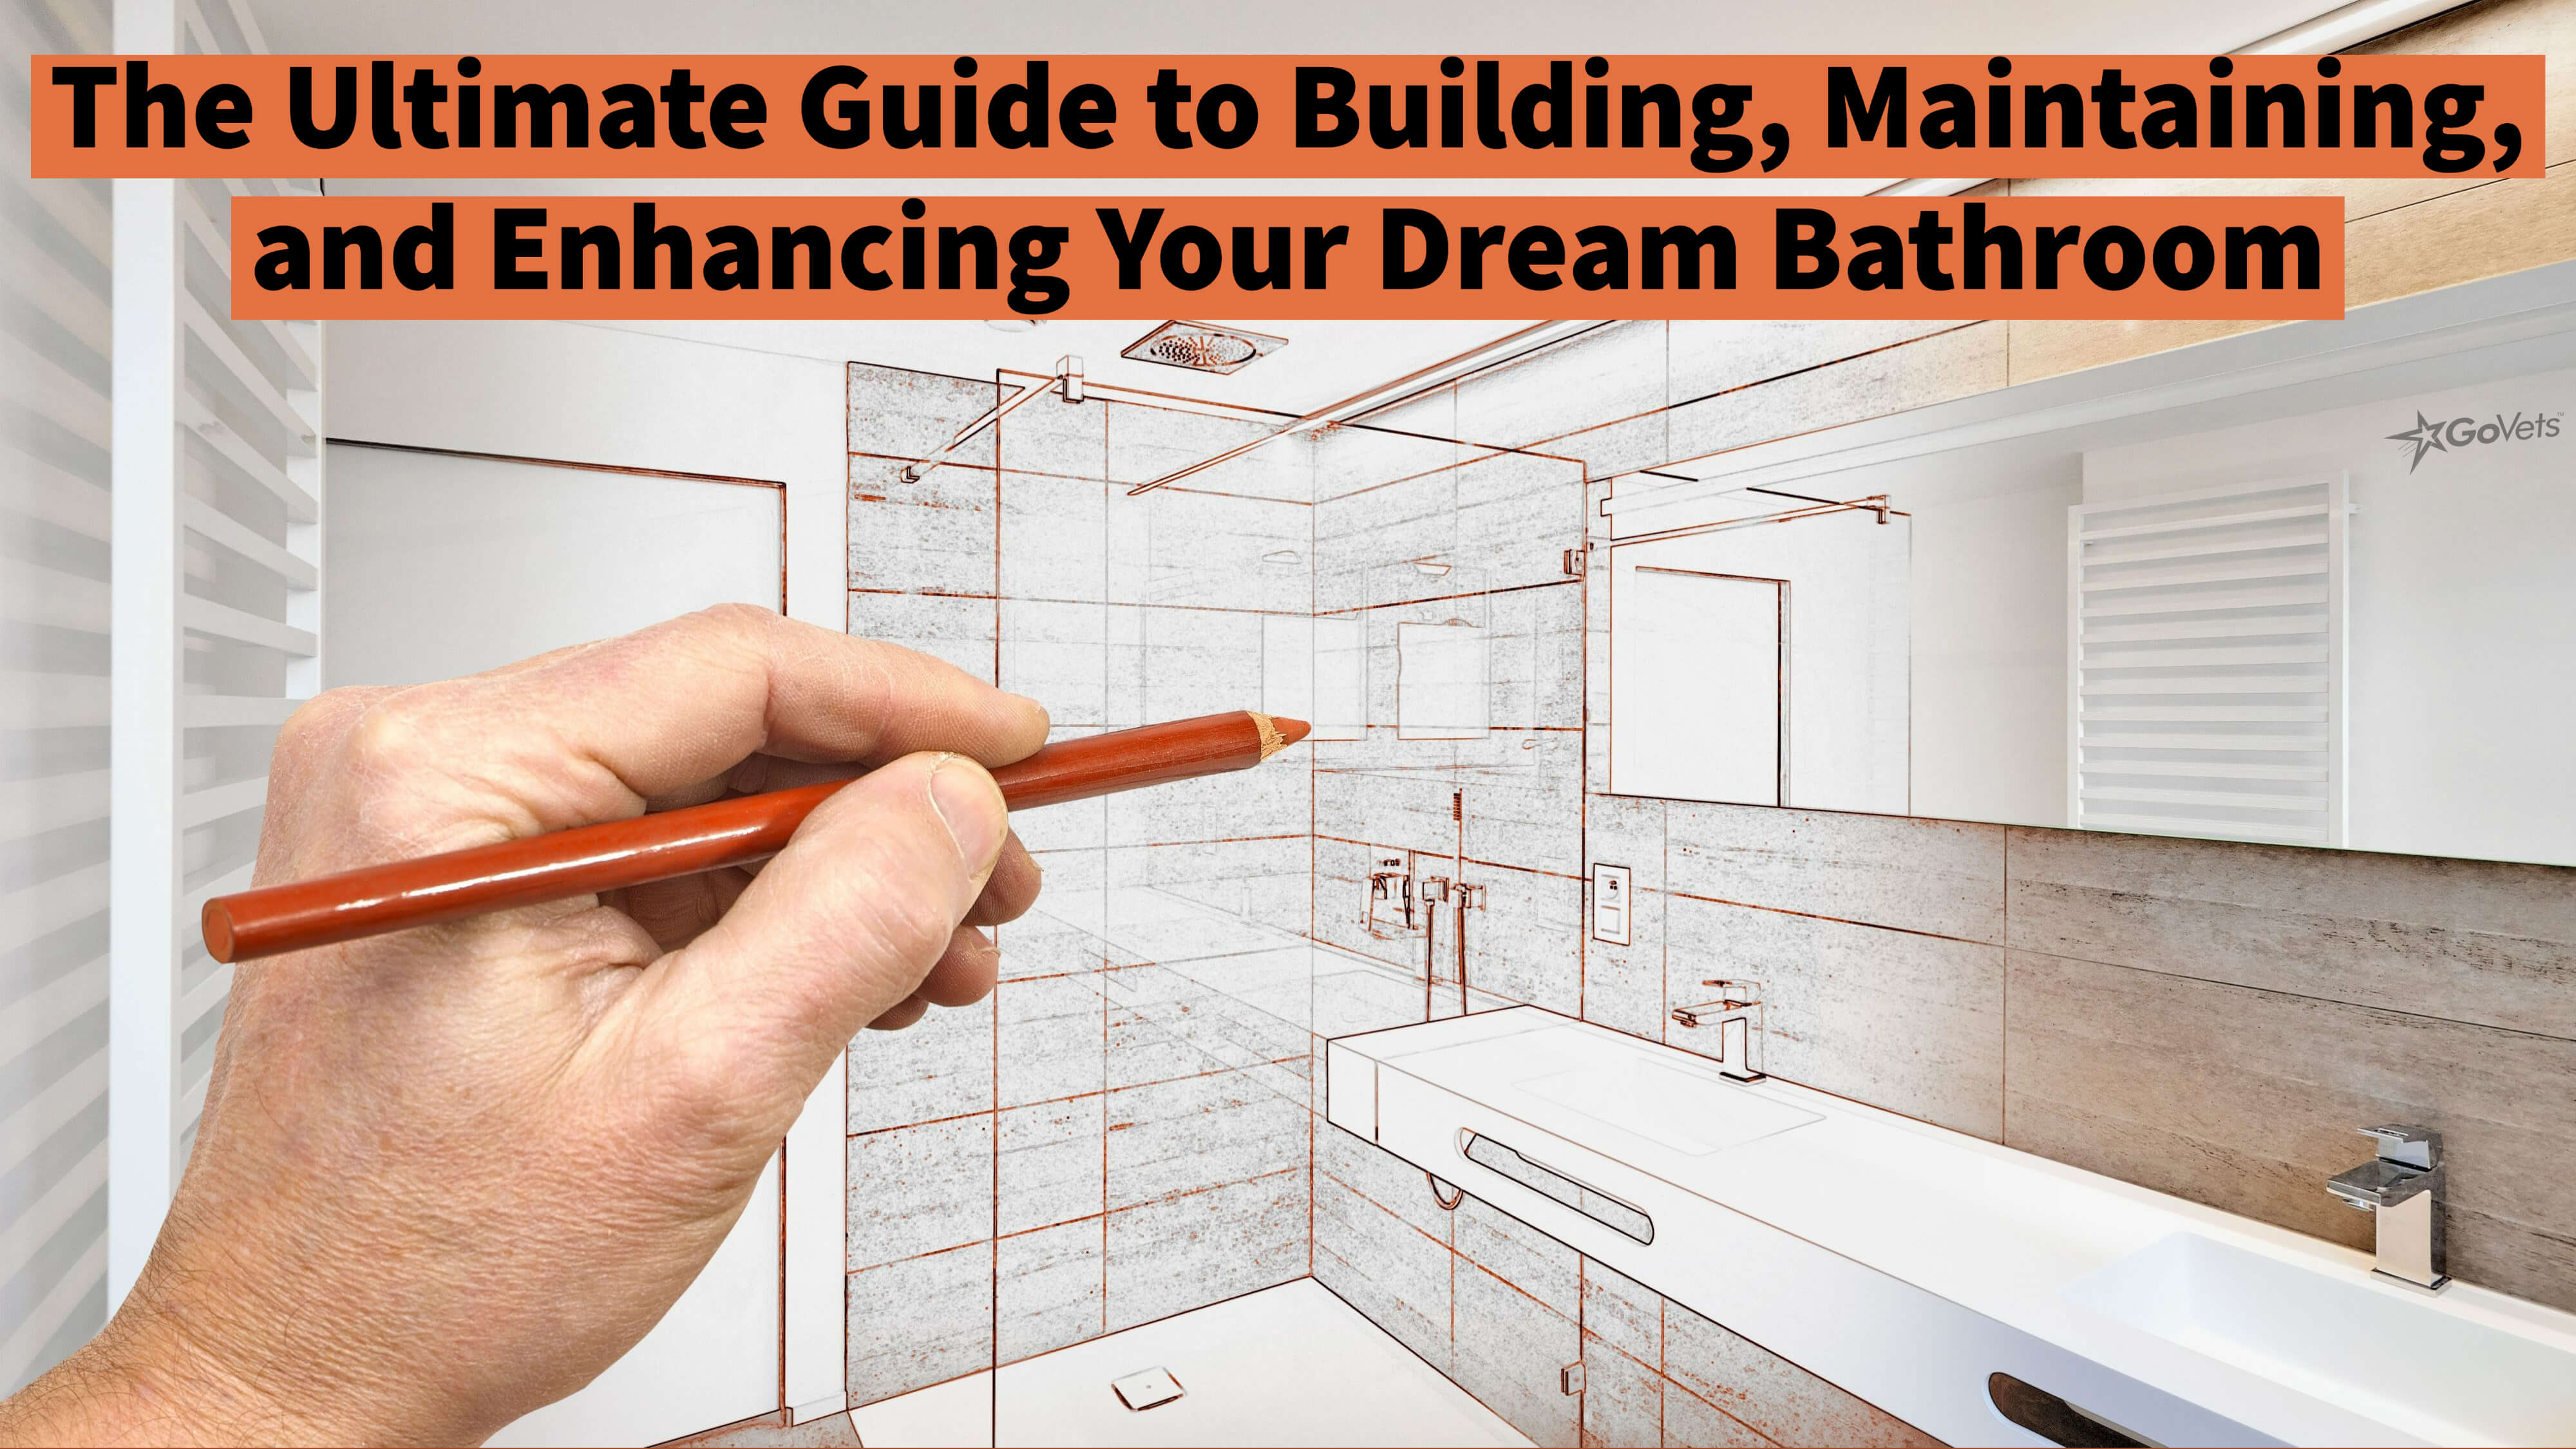 The Ultimate Guide to Building, Maintaining, and Enhancing Your Dream Bathroom with GoVets